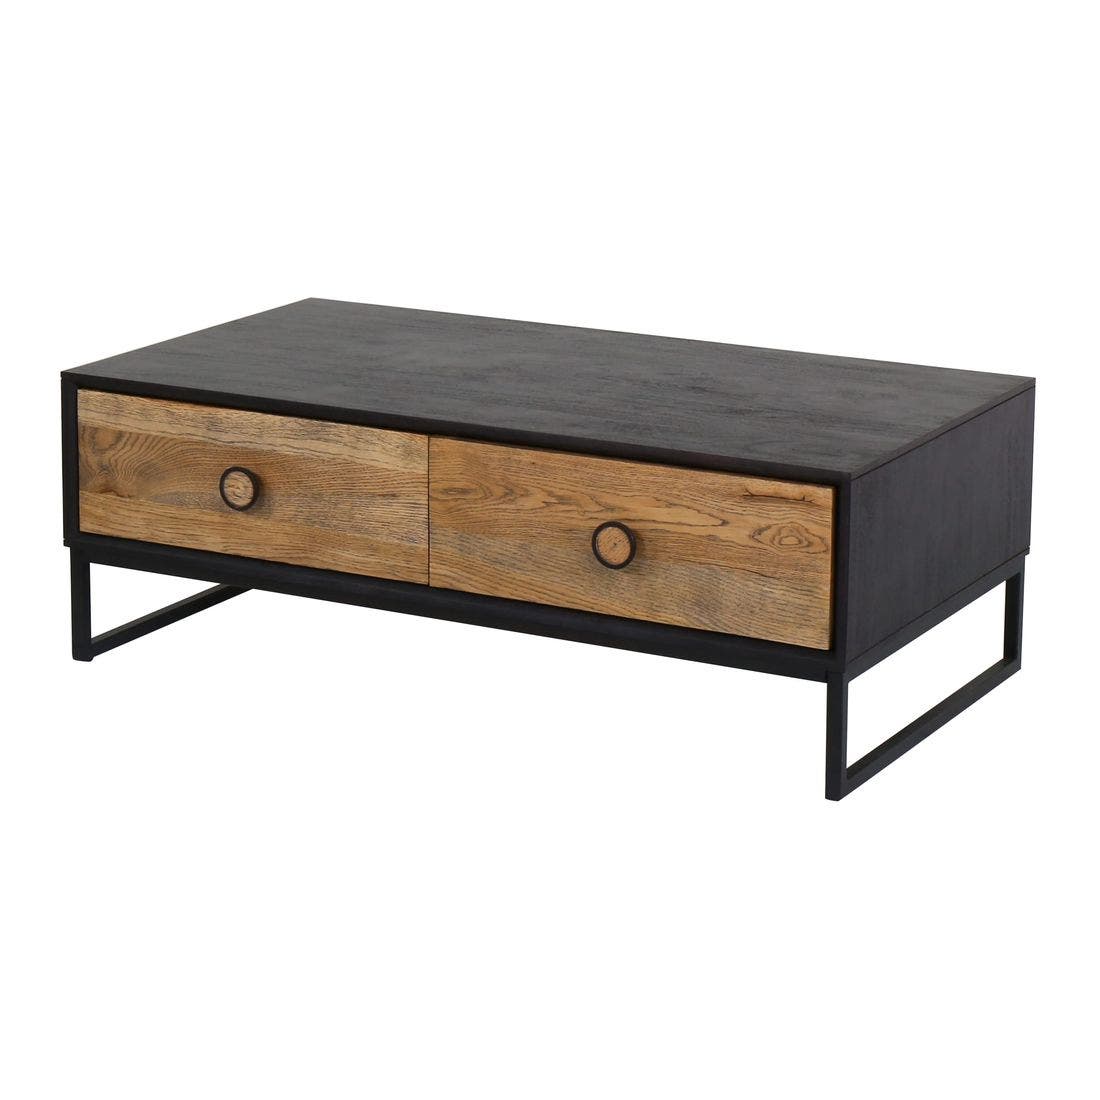 19184646-trossy-furniture-living-room-coffee-table-01